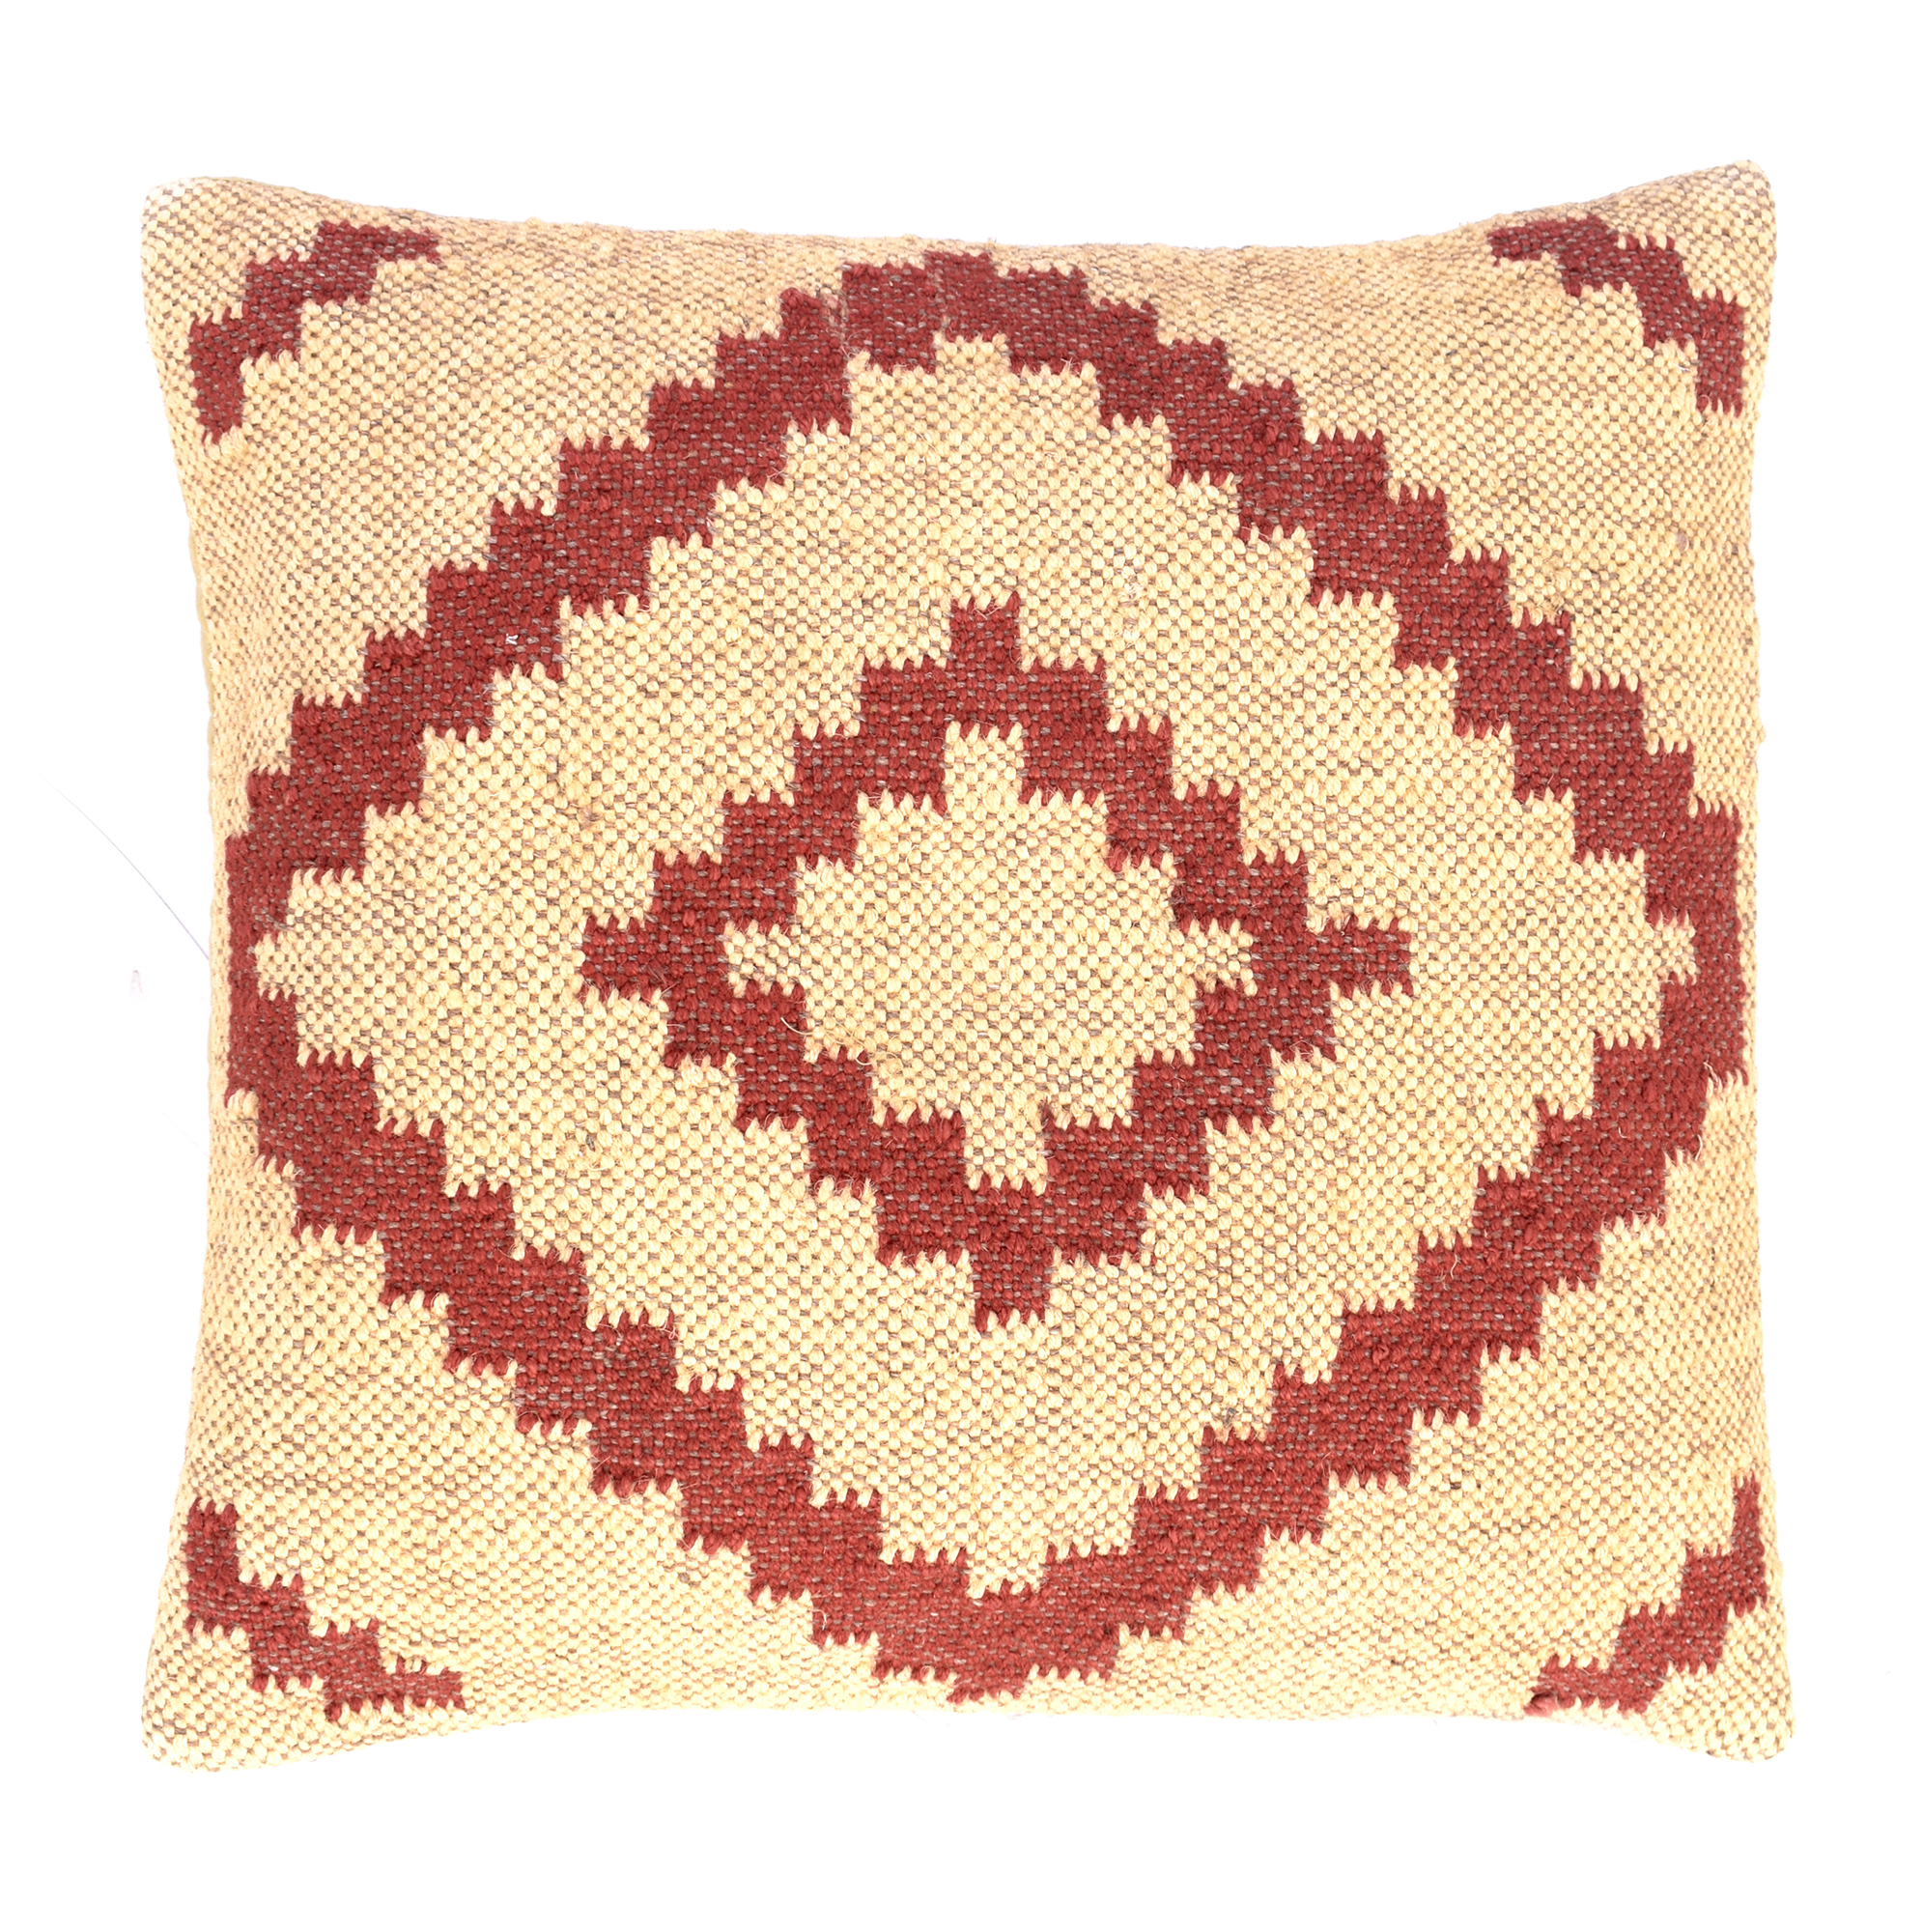 Details about   Handmade Cushion Covers,Wool Jute Kilim Pillow Cases,Bedding Cushion Cover 